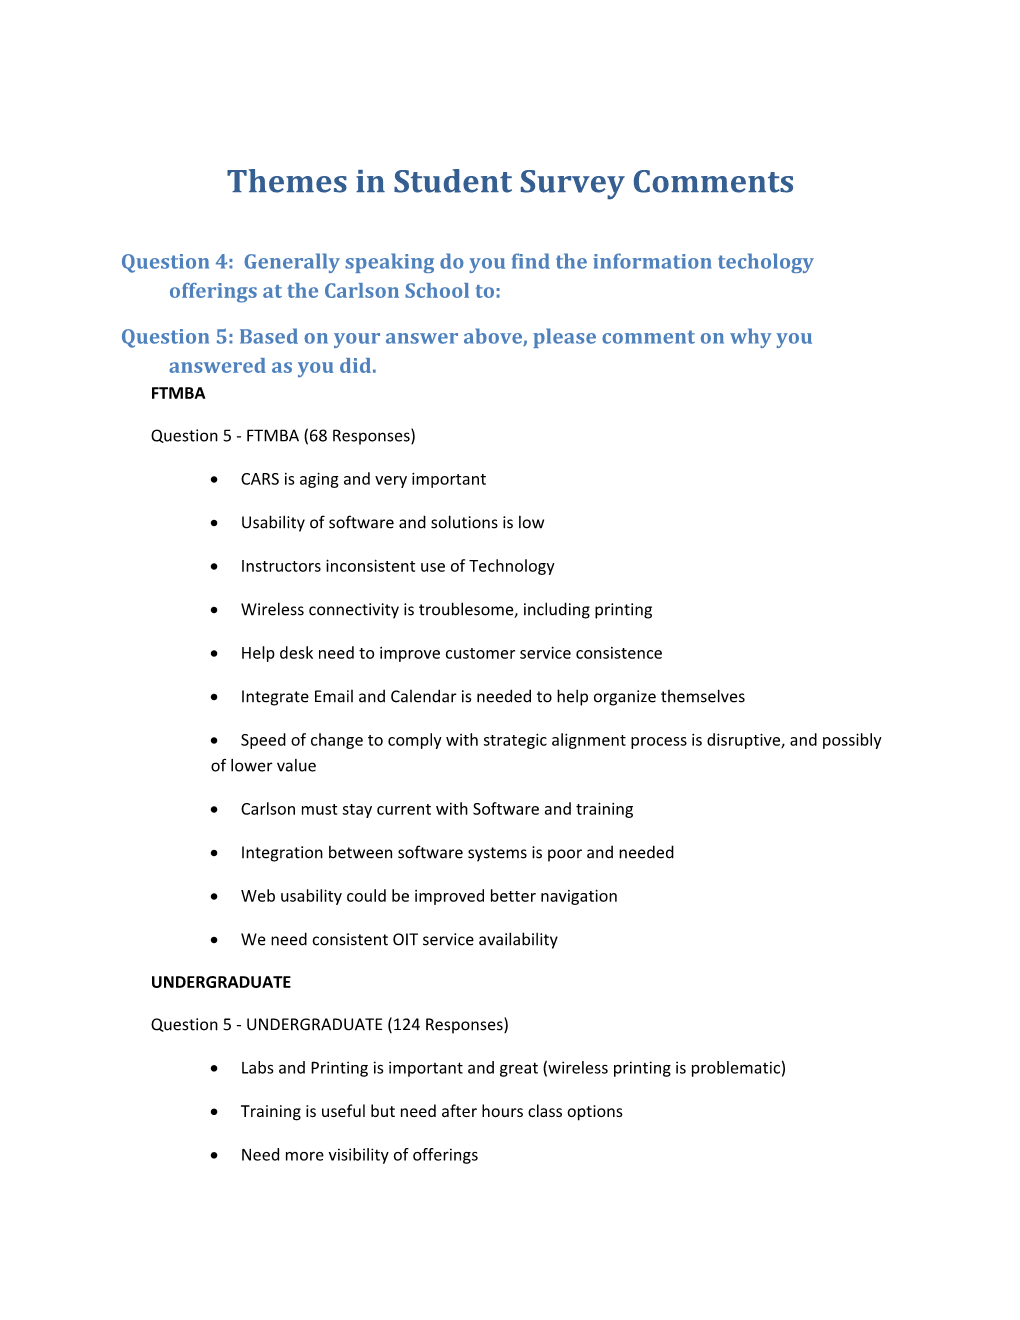 Task Force - Student Survey - Themes in Comment Questions